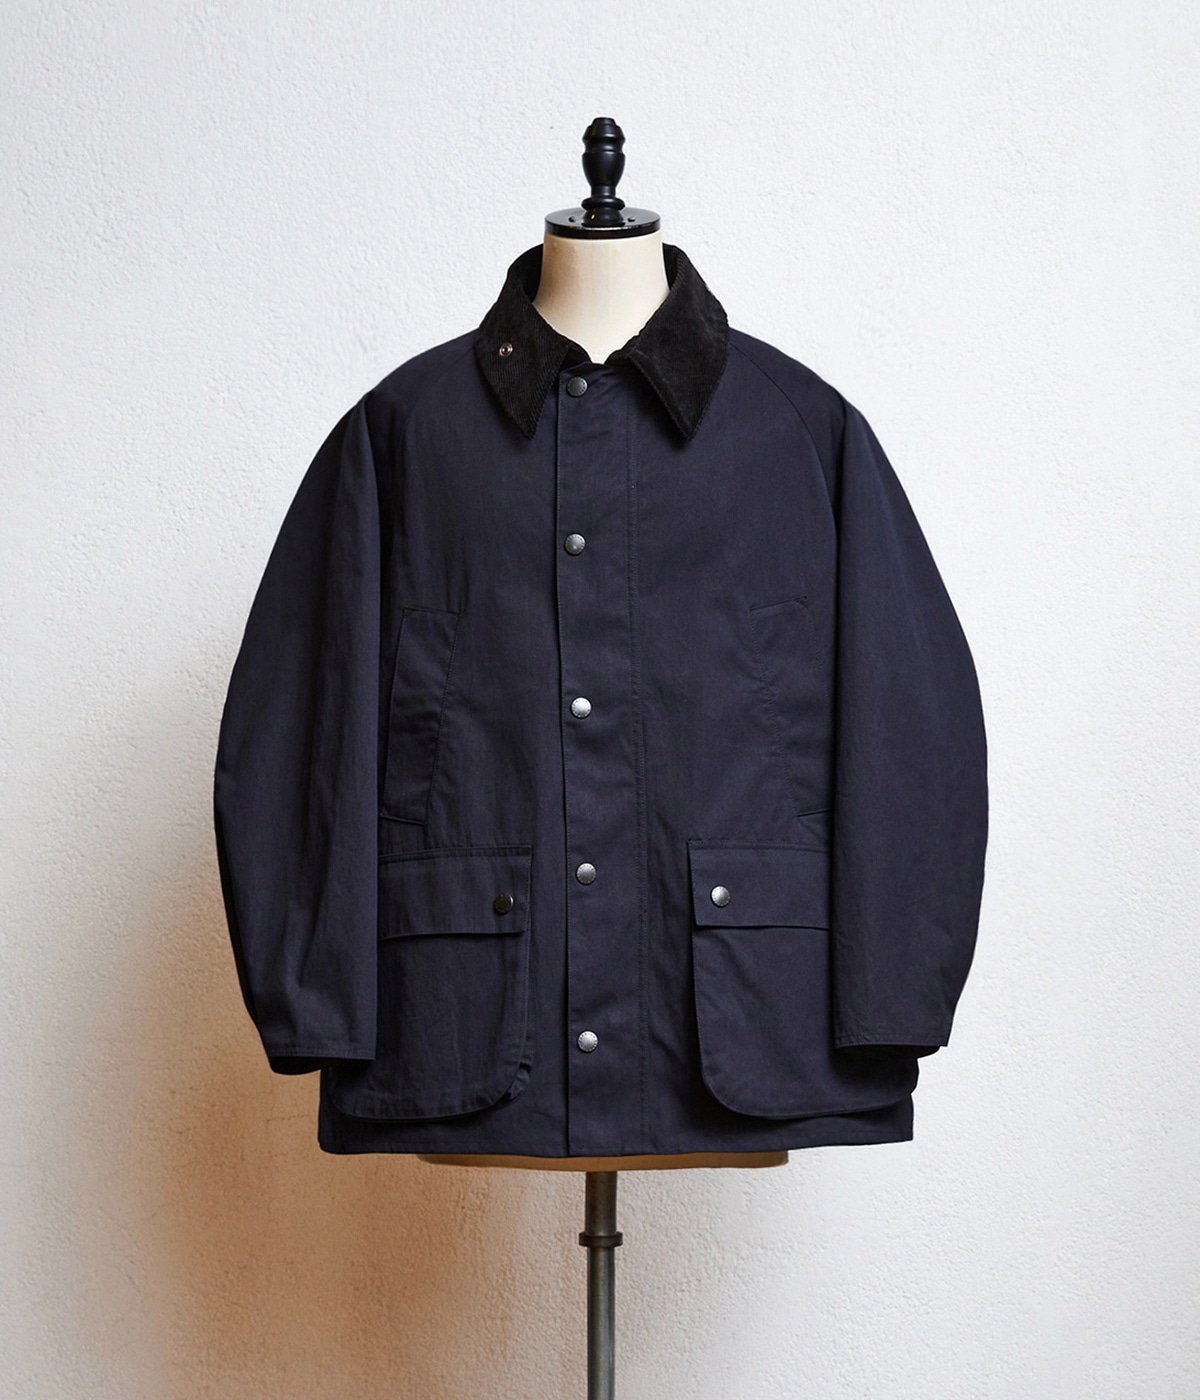 ONLY ARK barbour 別注 BIG BEDALE 42 黒よろしくお願いいたします